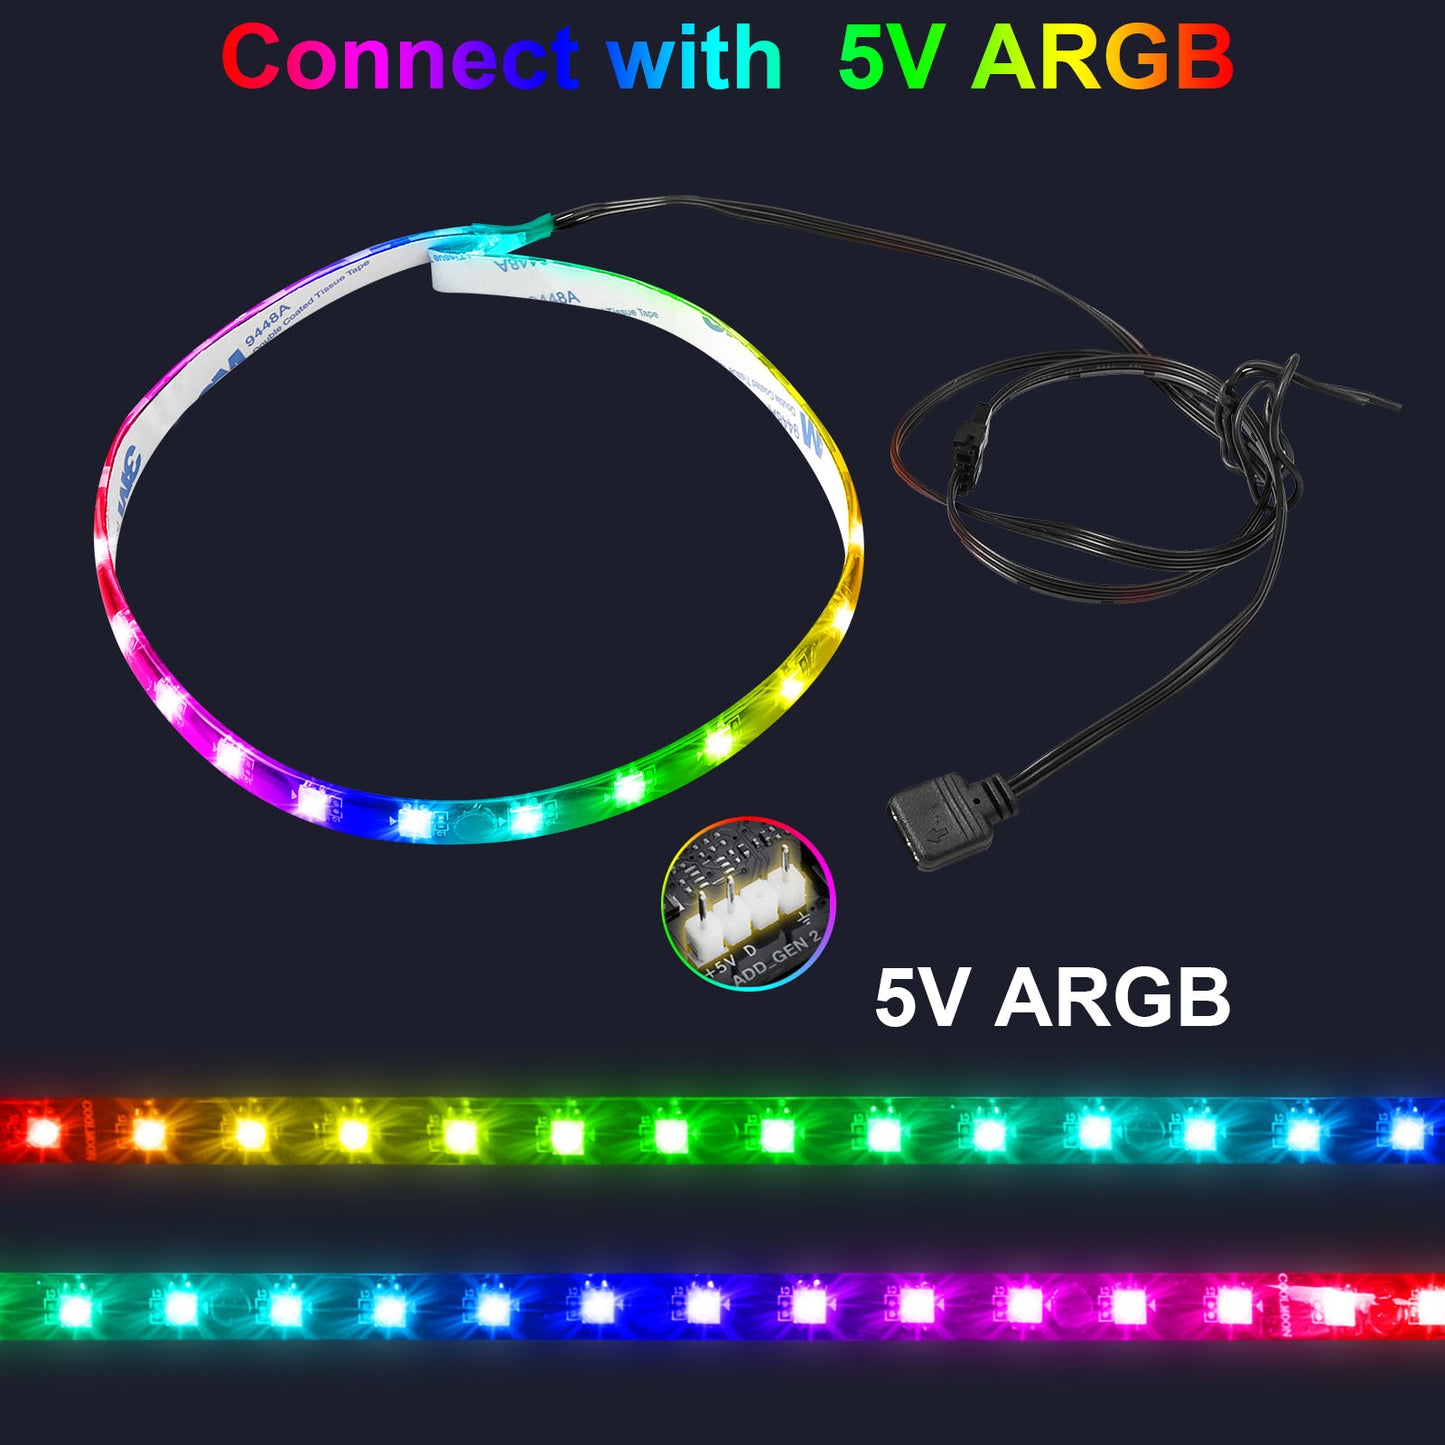 ARGB LED Strip for PC with 5V 3-pin